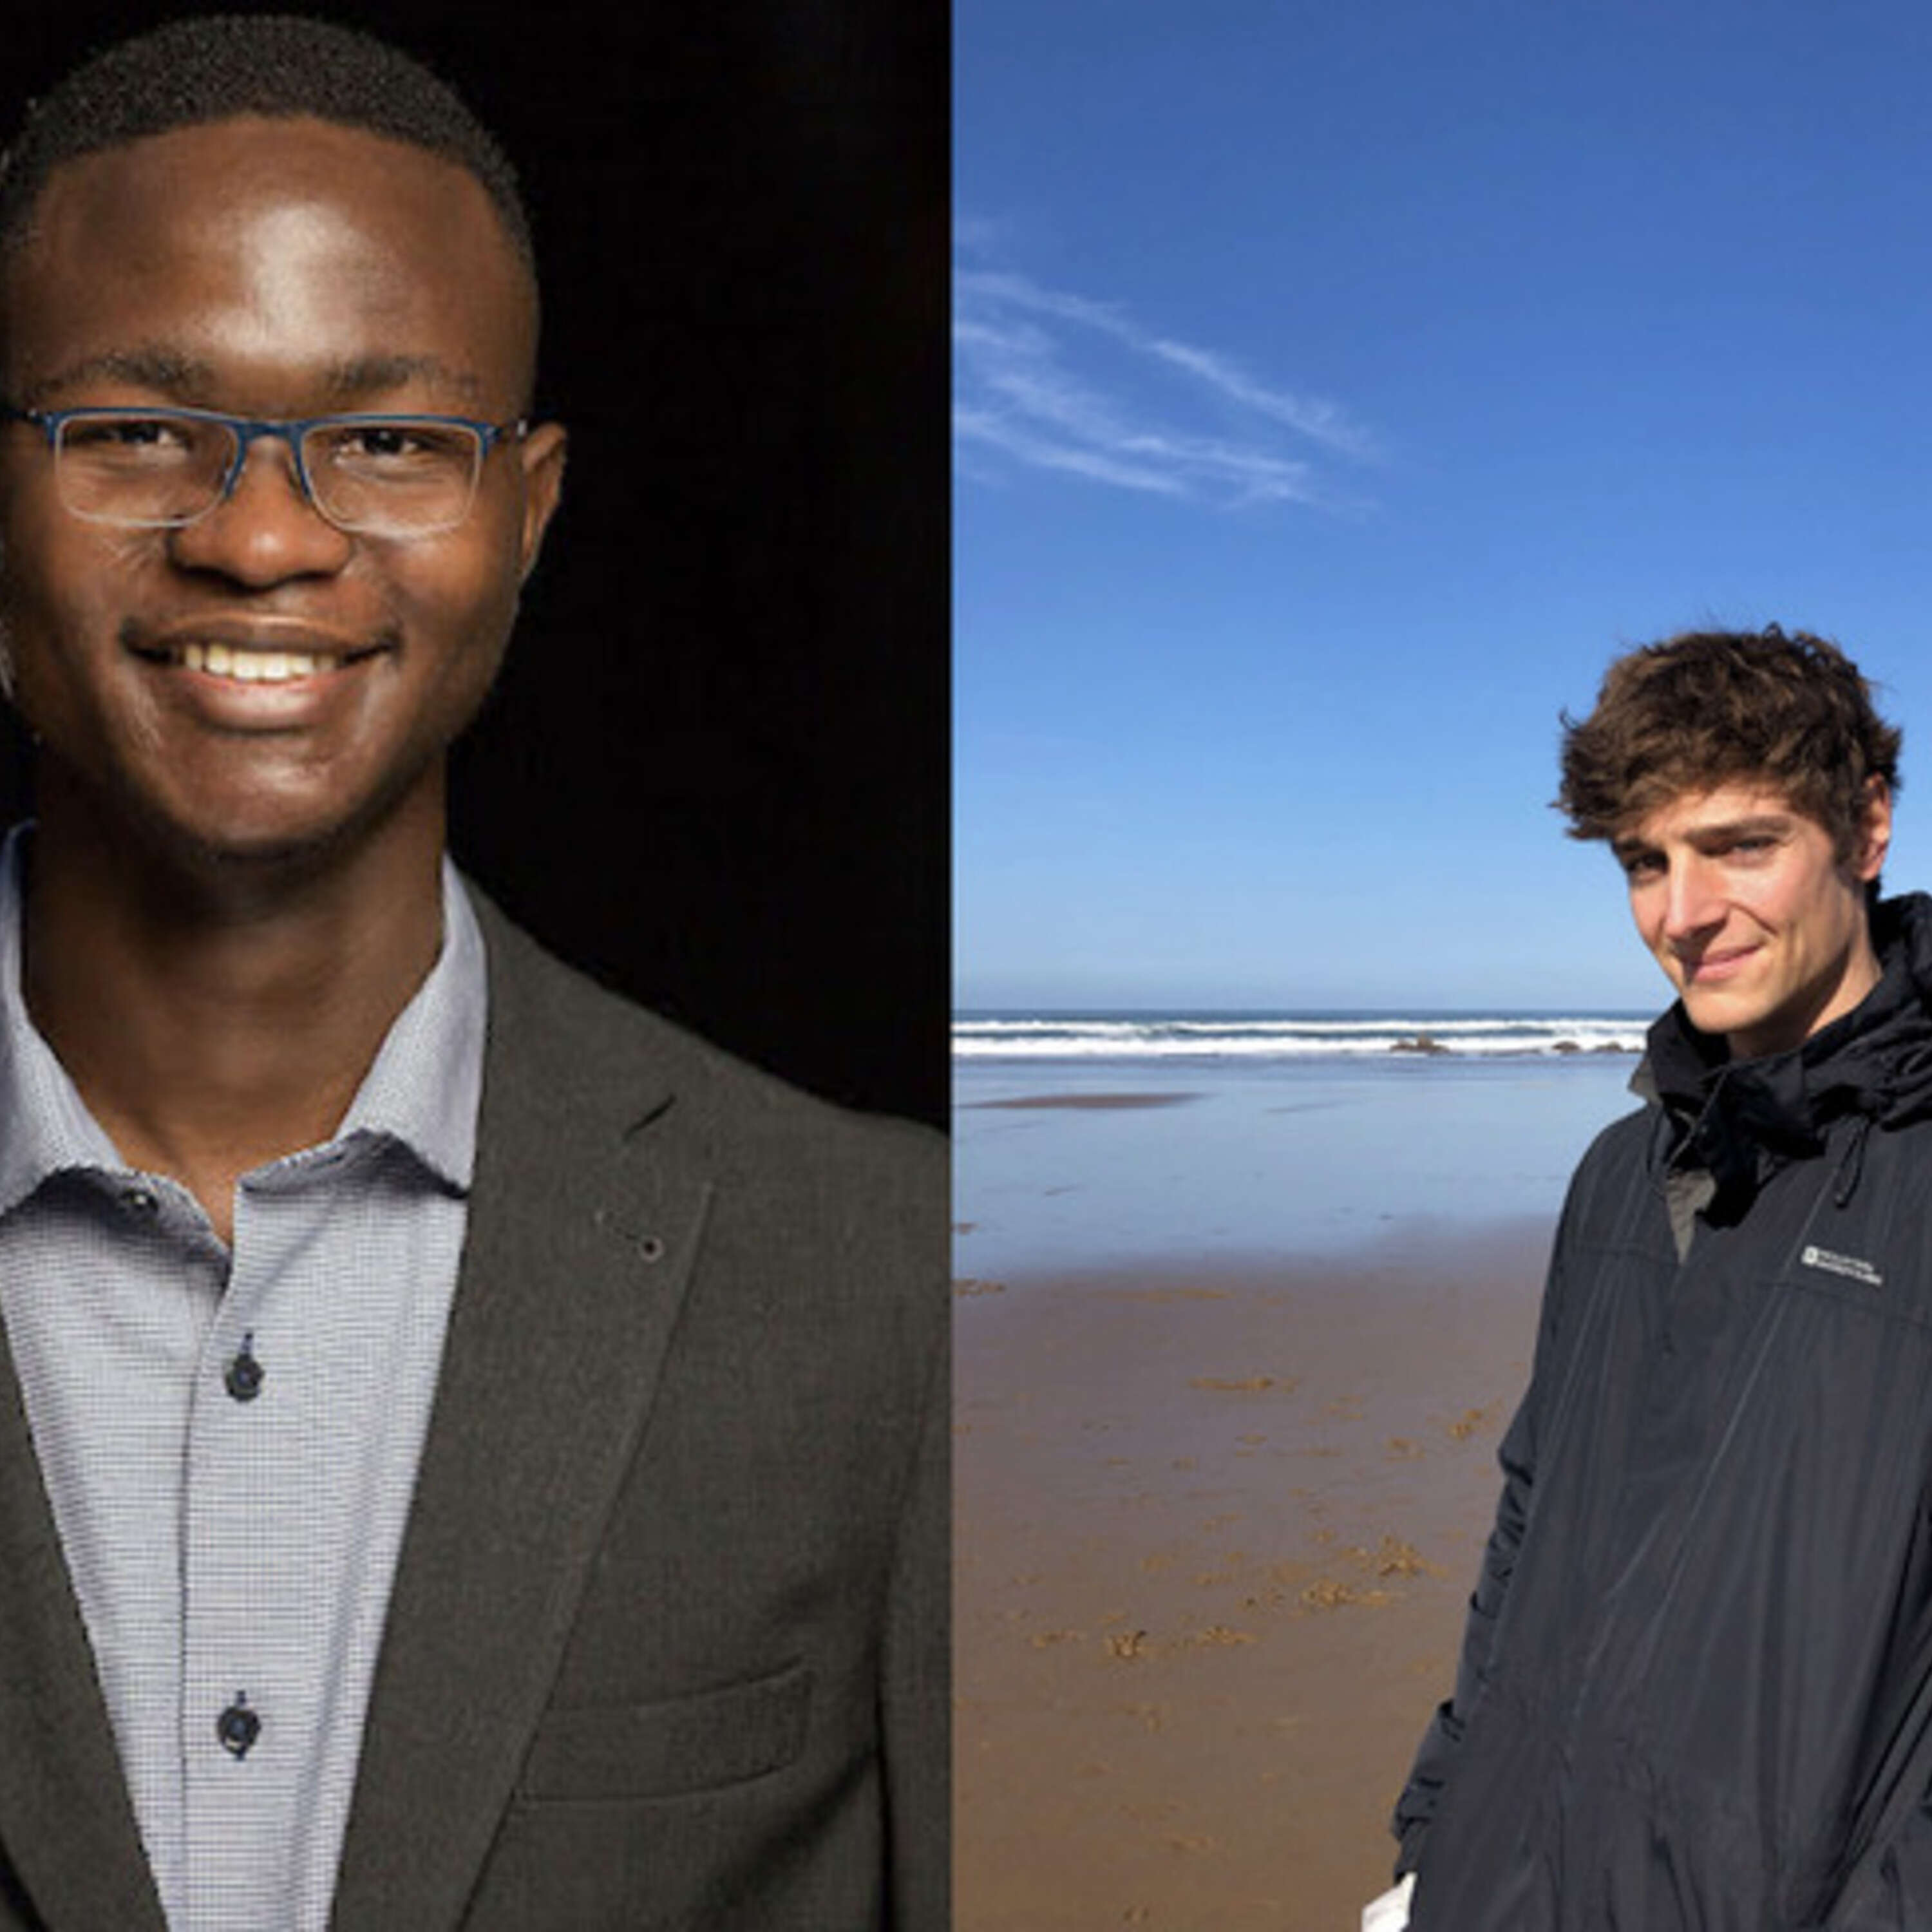 Youthful Exuberance at the Kenya Lab: A Conversation with Victor Akinwande and Julian Kuehnert